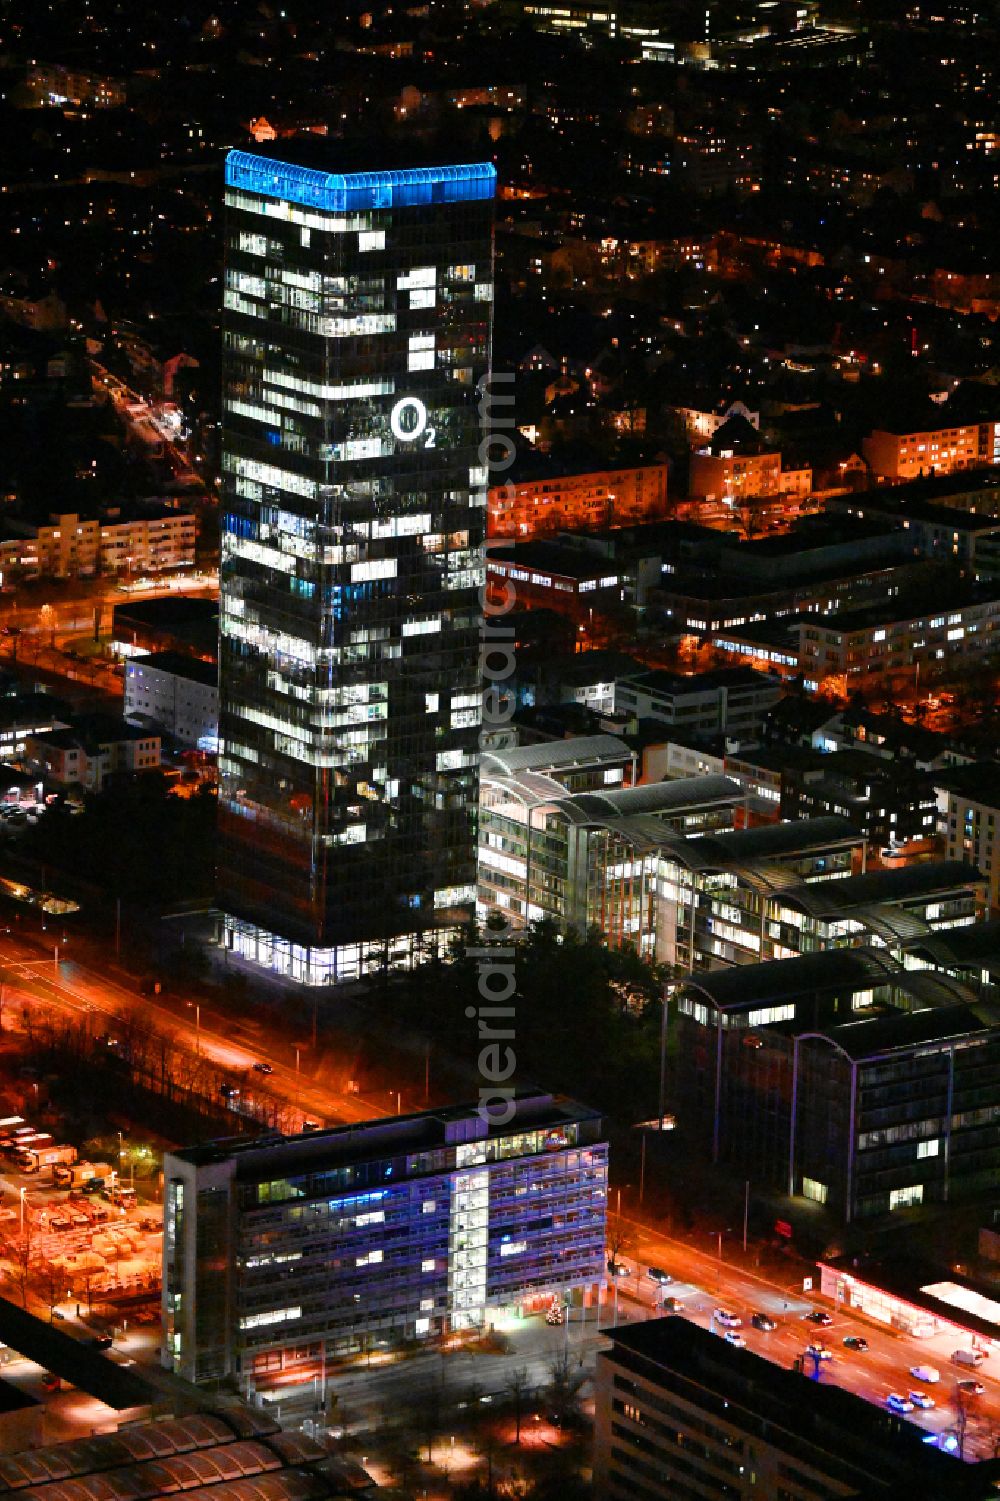 München at night from the bird perspective: Night lighting uptown high-rise building - headquarters of Telefonica Germany (O2) and Astellas Pharma GmbH on Georg-Brauchle-Ring in the Moosach district of Munich in the state of Bavaria